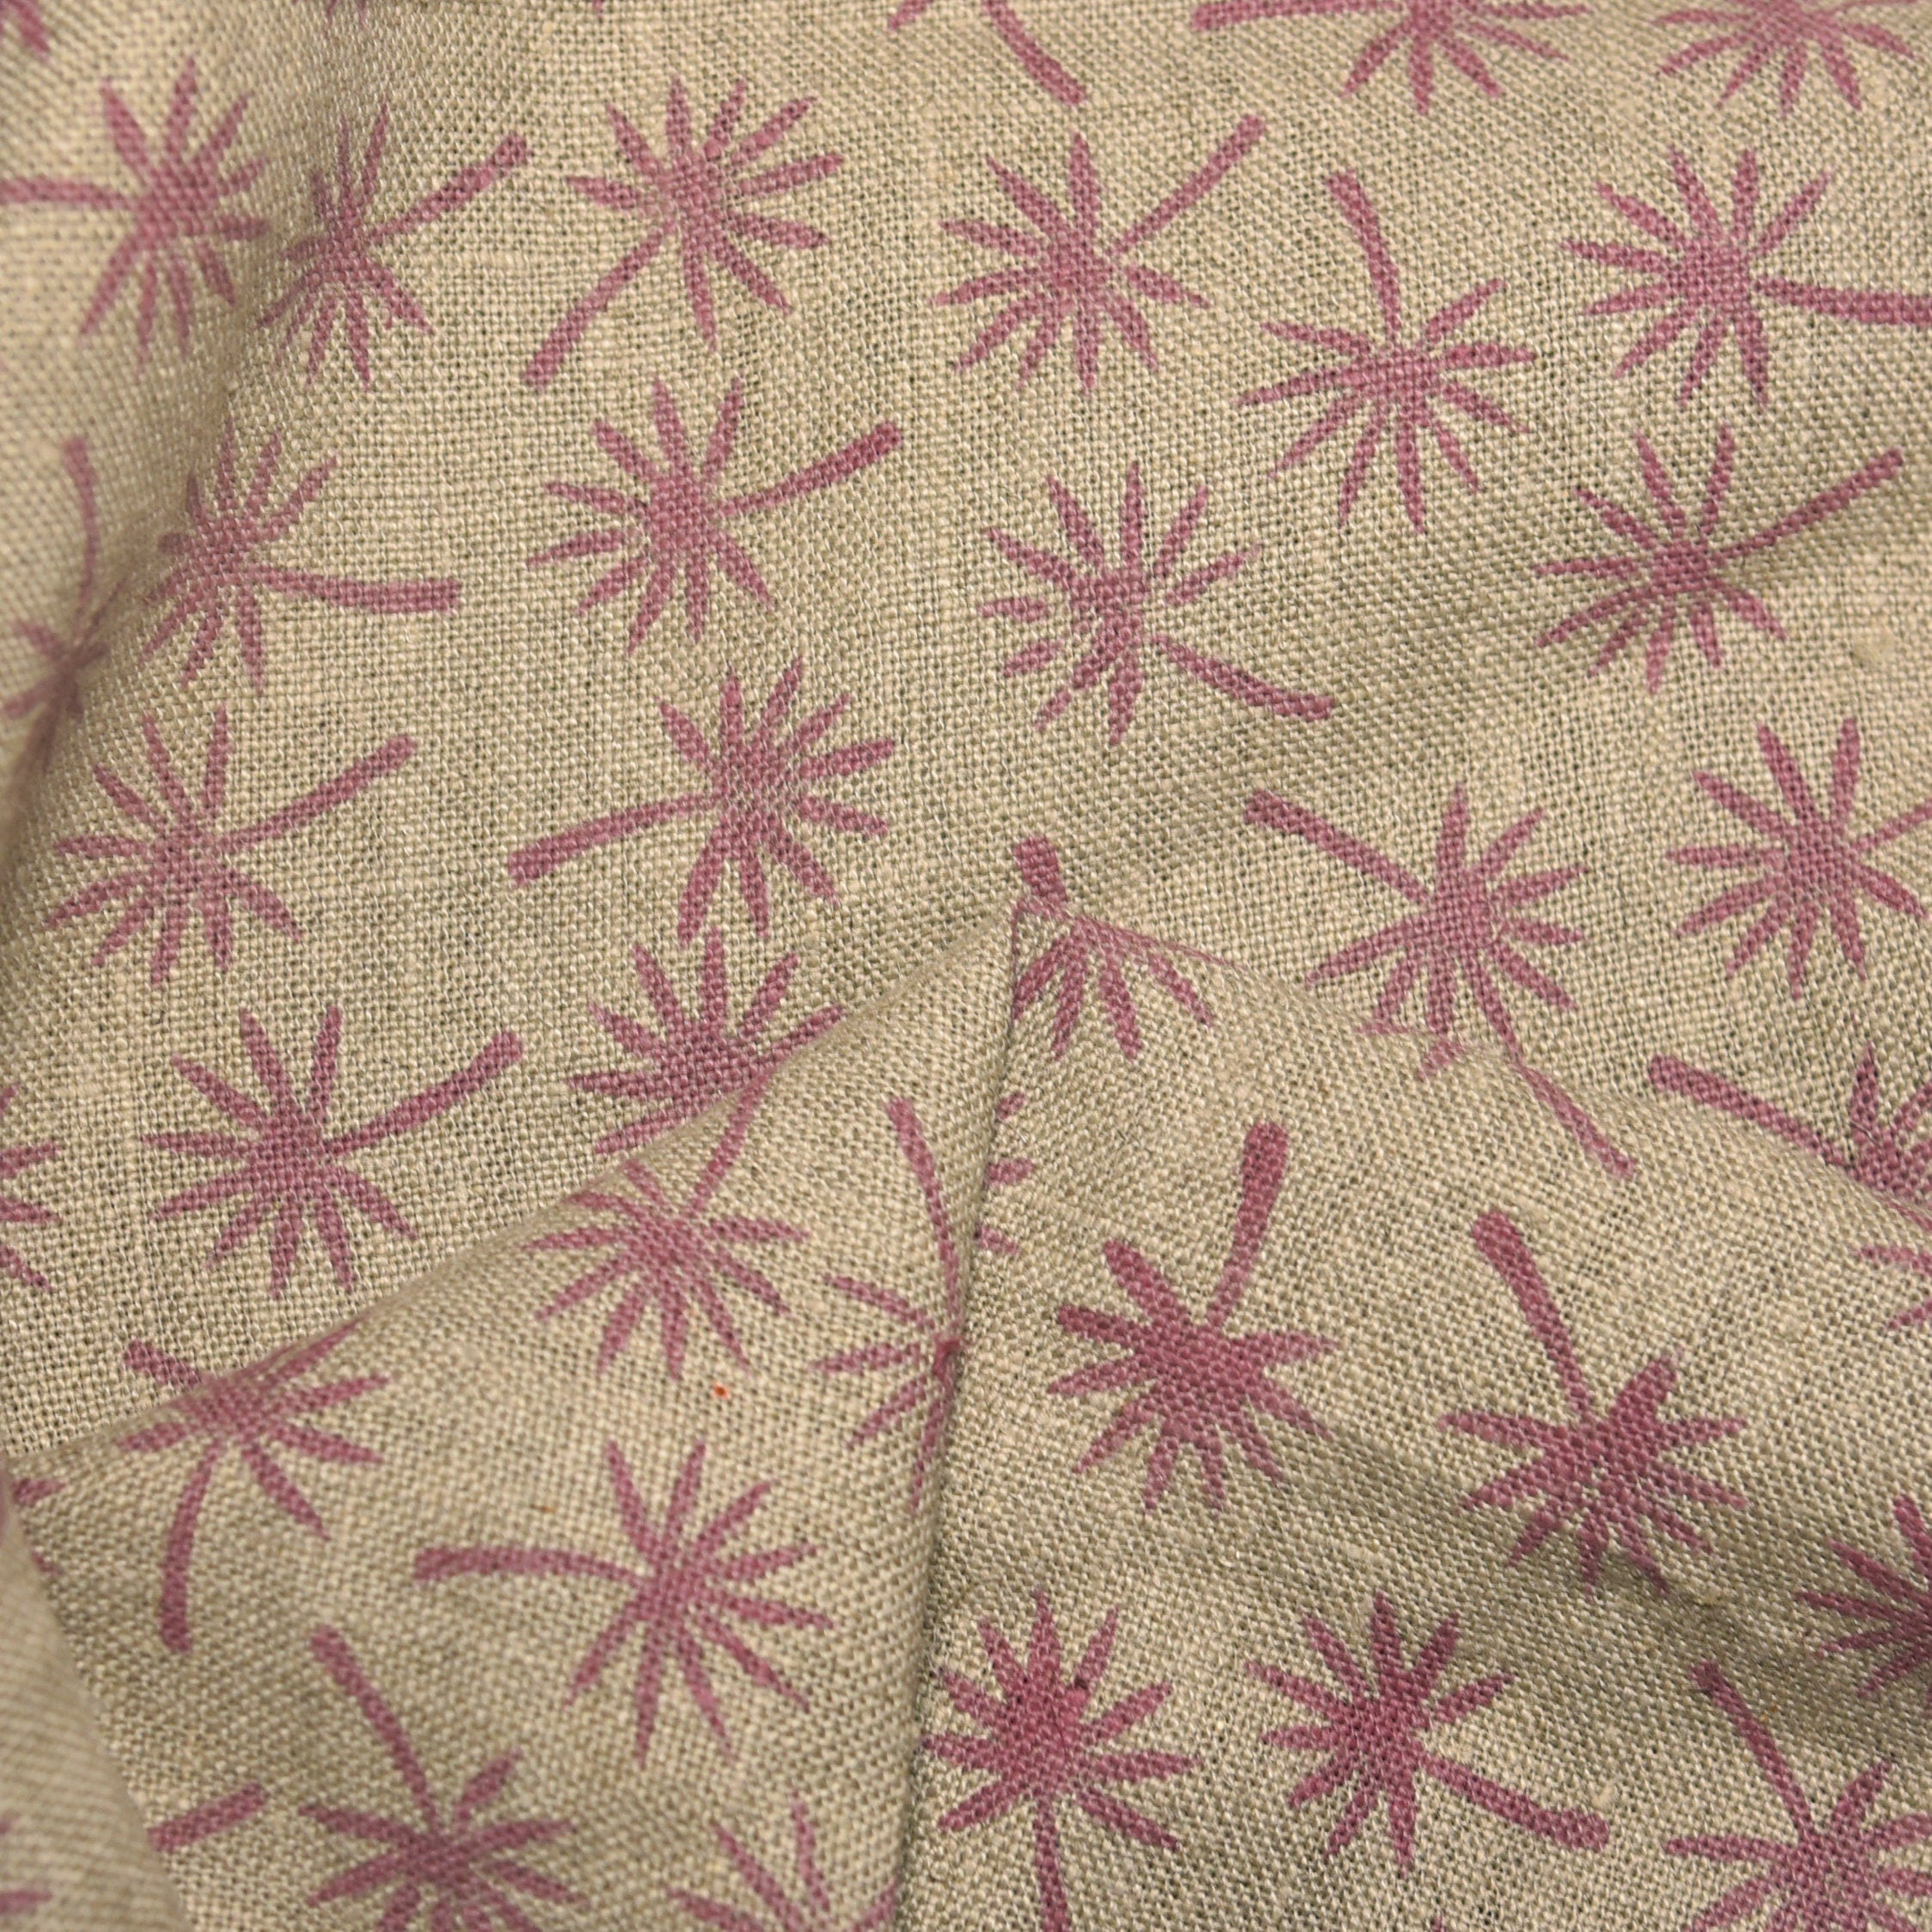 Coconut Tree  Handloom Linen Fabric Linen Fabric Flower Colour Upholstery Fabric, Pillow Cover,Thick Linen Fabric Natural Colour